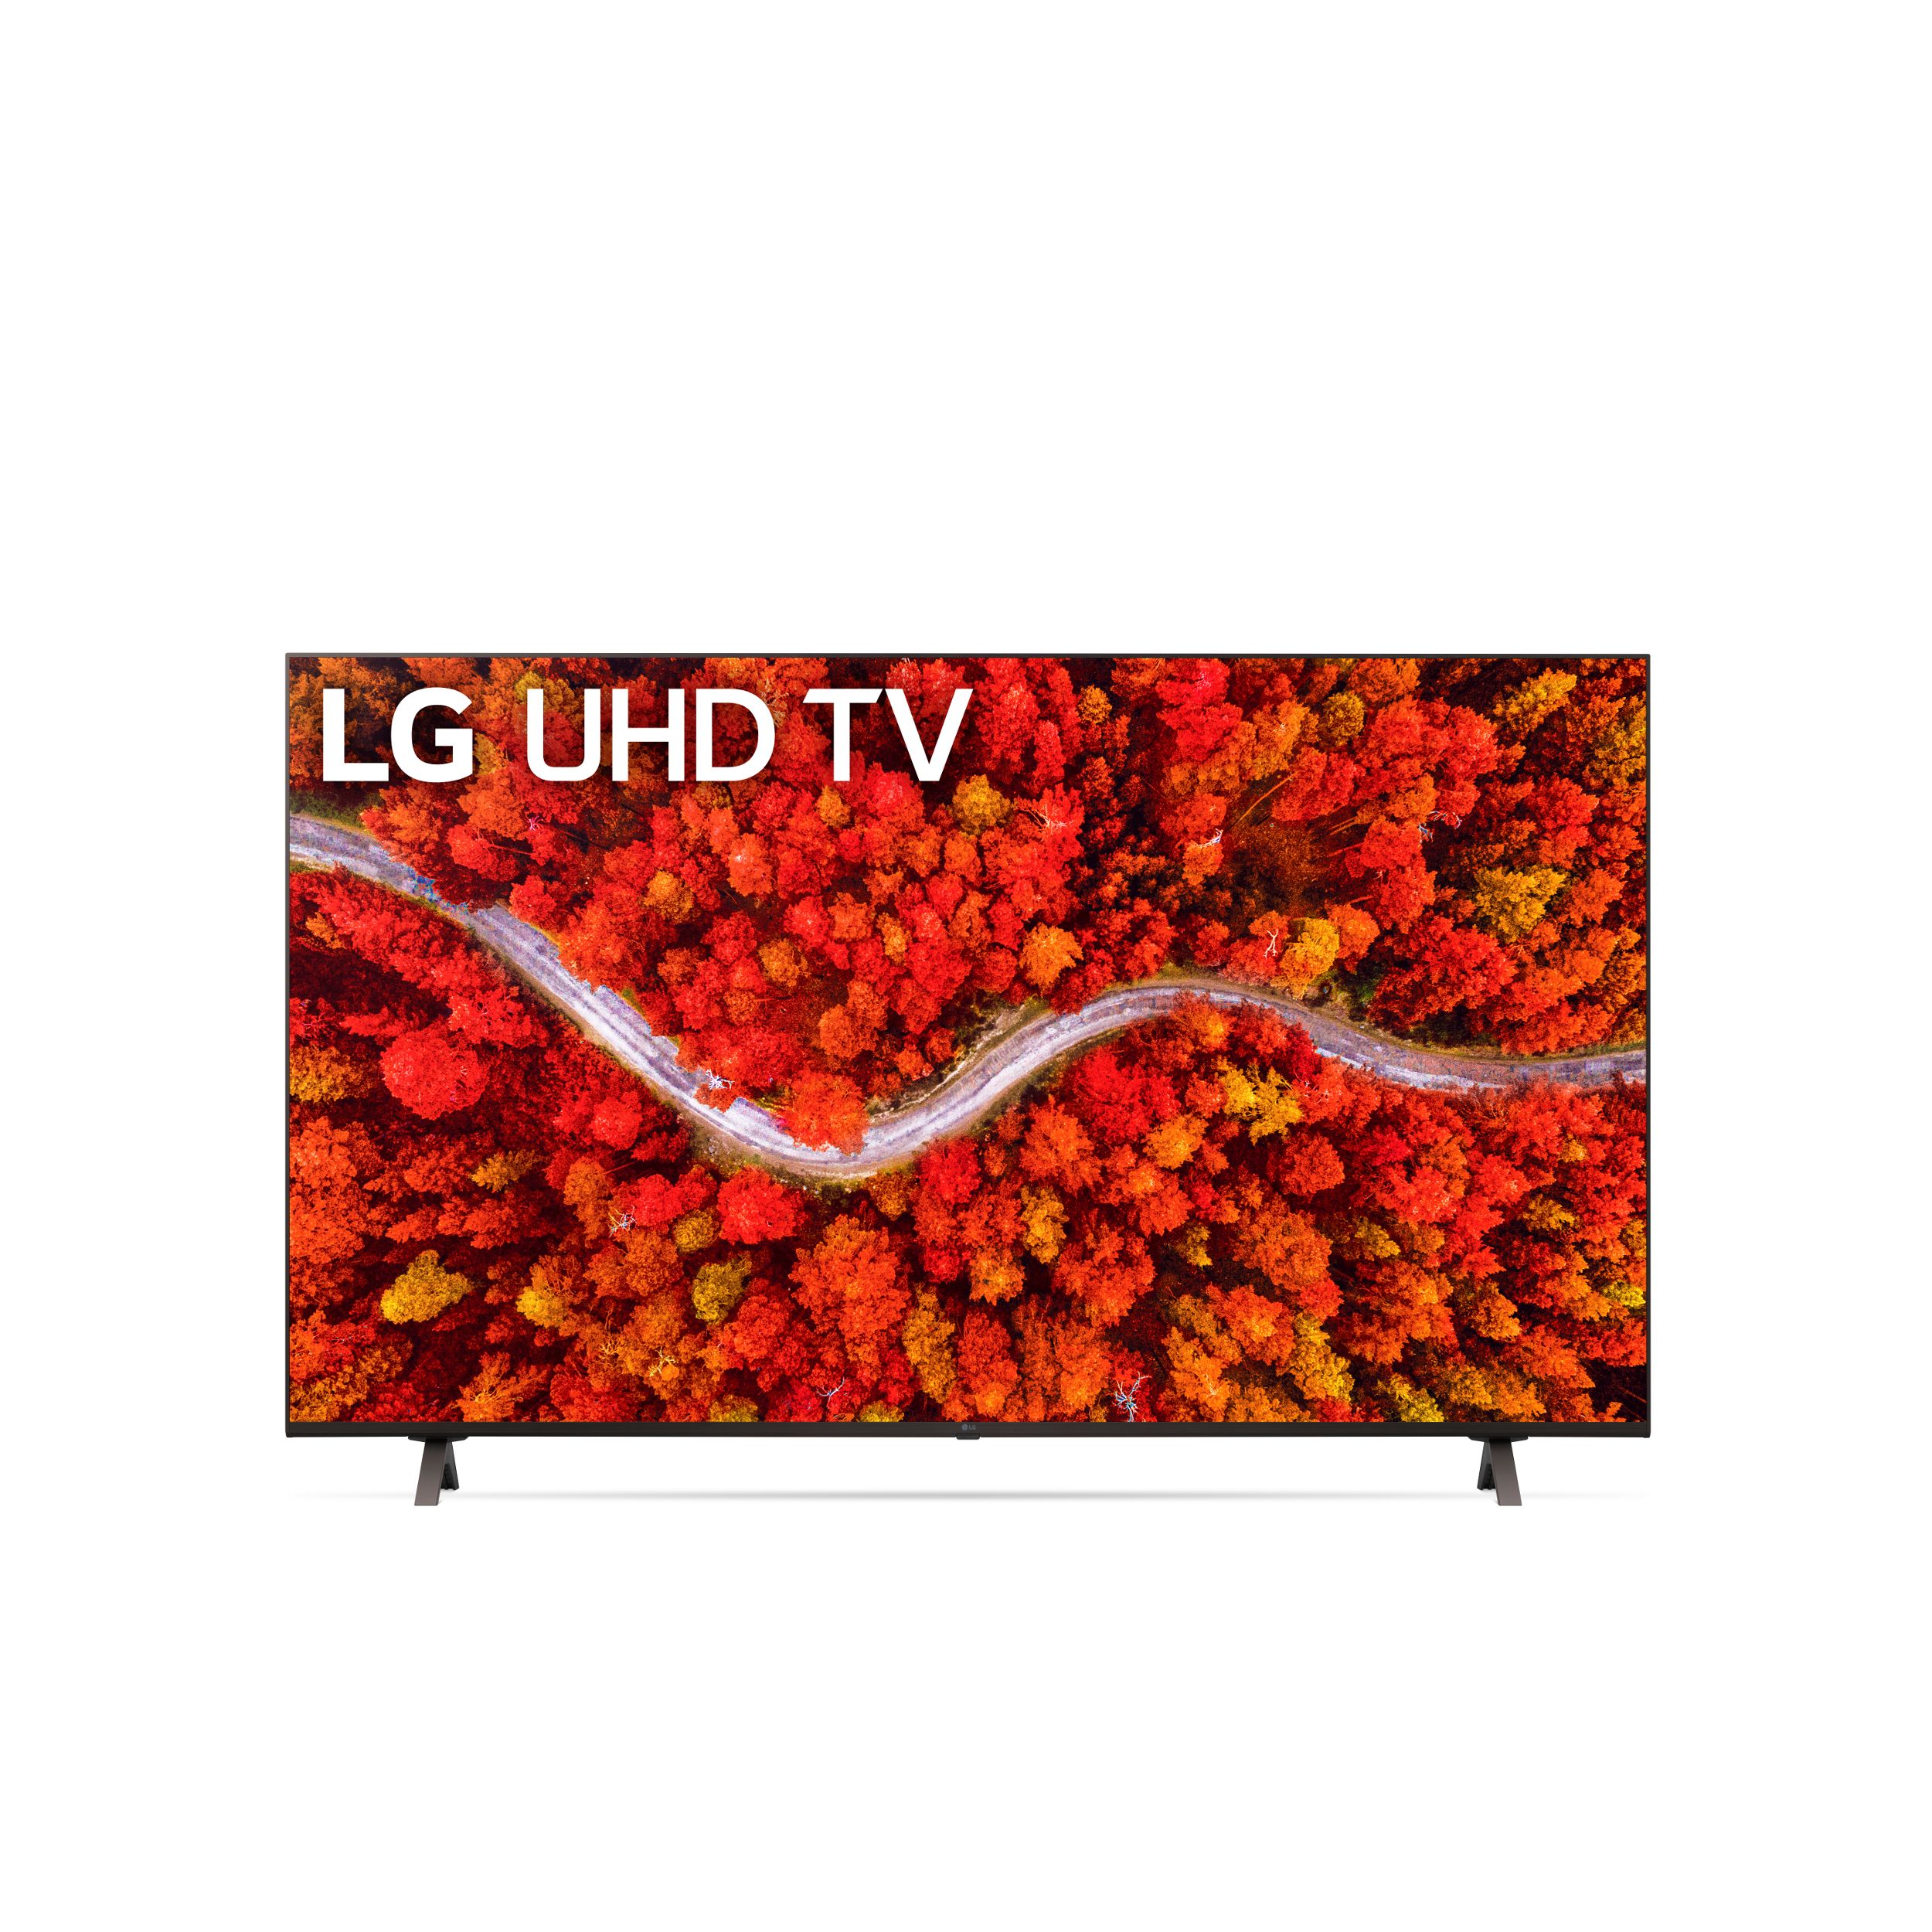 LG 65" UHD TV LG AI ThinQ 65UP8000PTB - best price deal - save $200 OFF for $1299(was $1499)